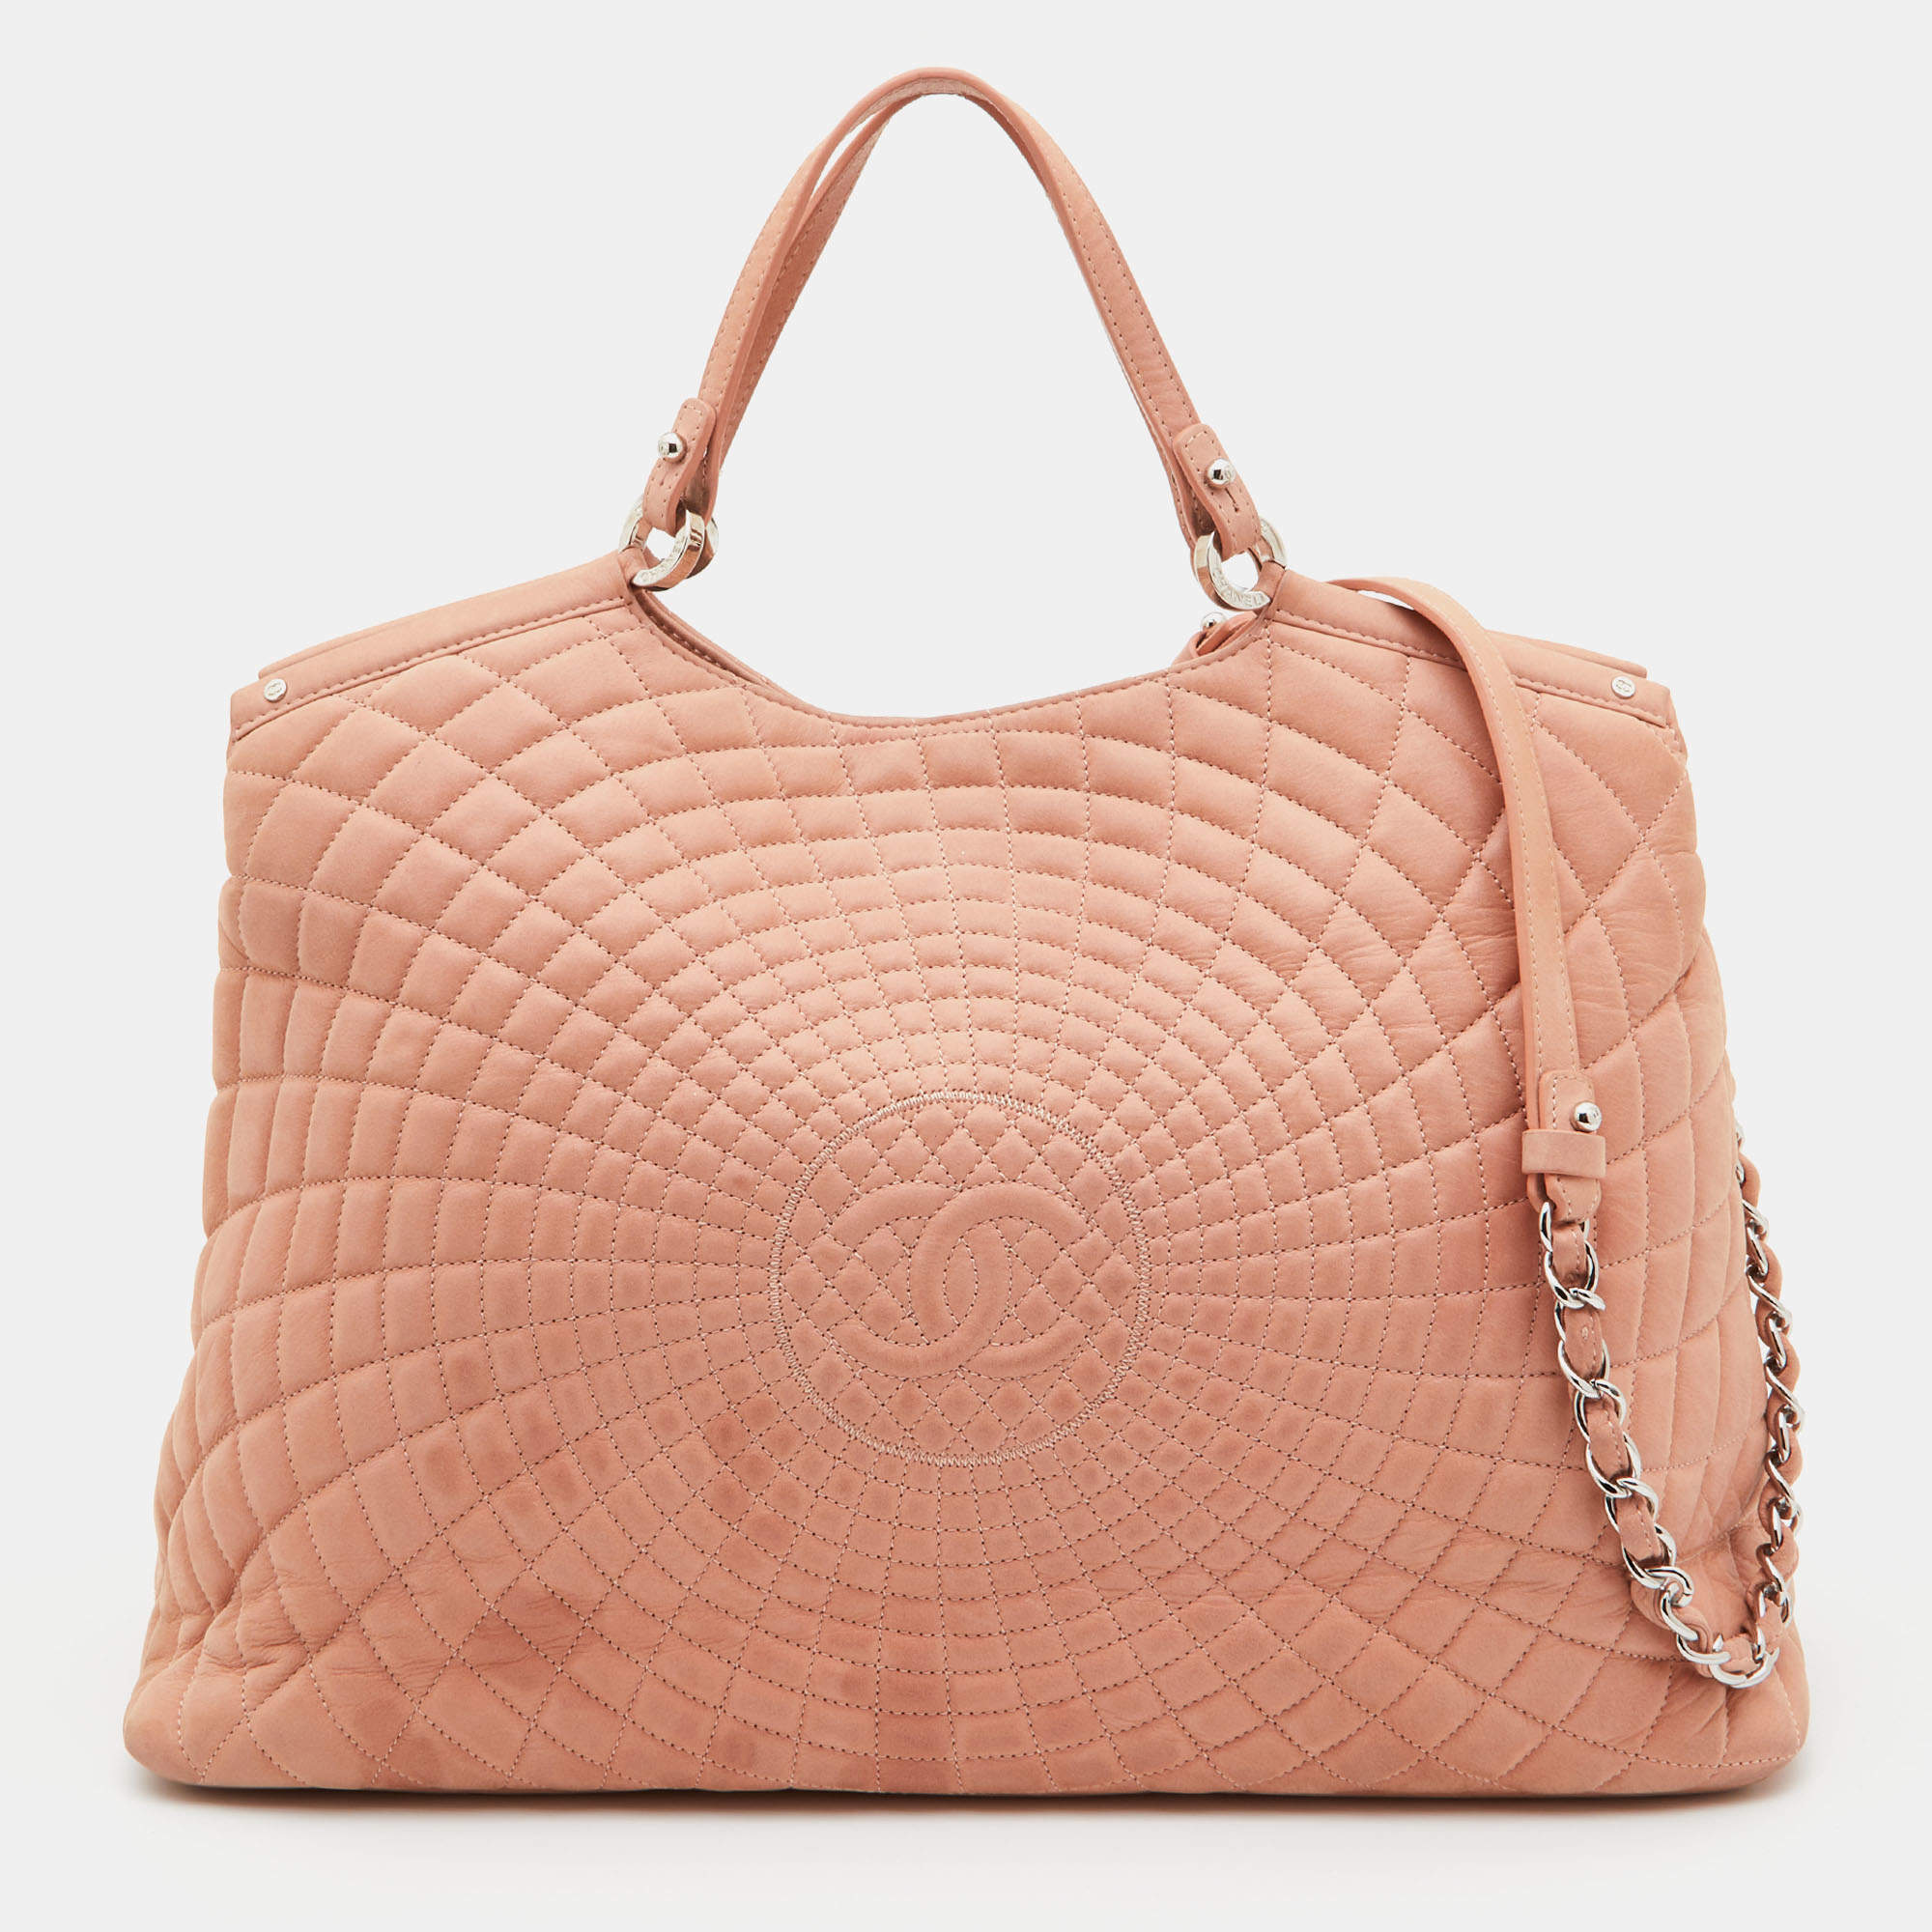 Chanel Light Pink Quilted Iridescent Leather Large Sea Hit Tote Chanel